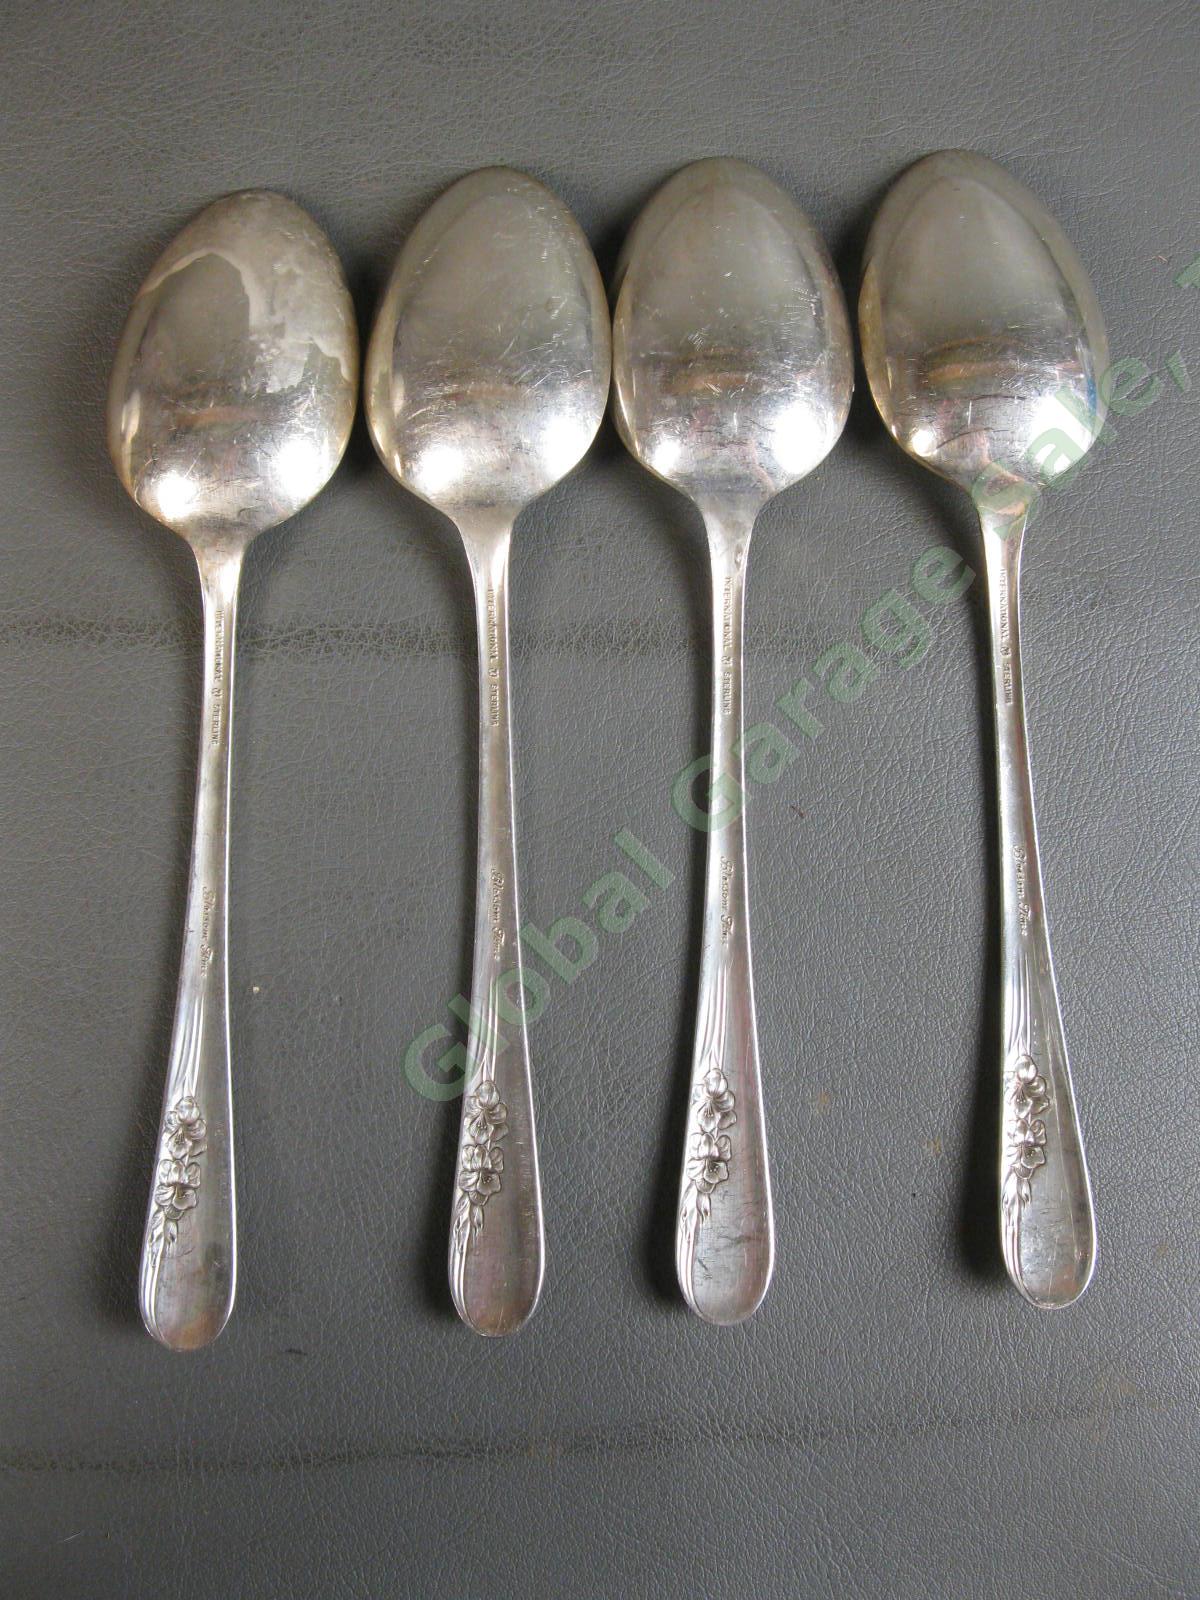 4 International Sterling Silver Blossom Time Tablespoons Serving Spoon Set 252g 2